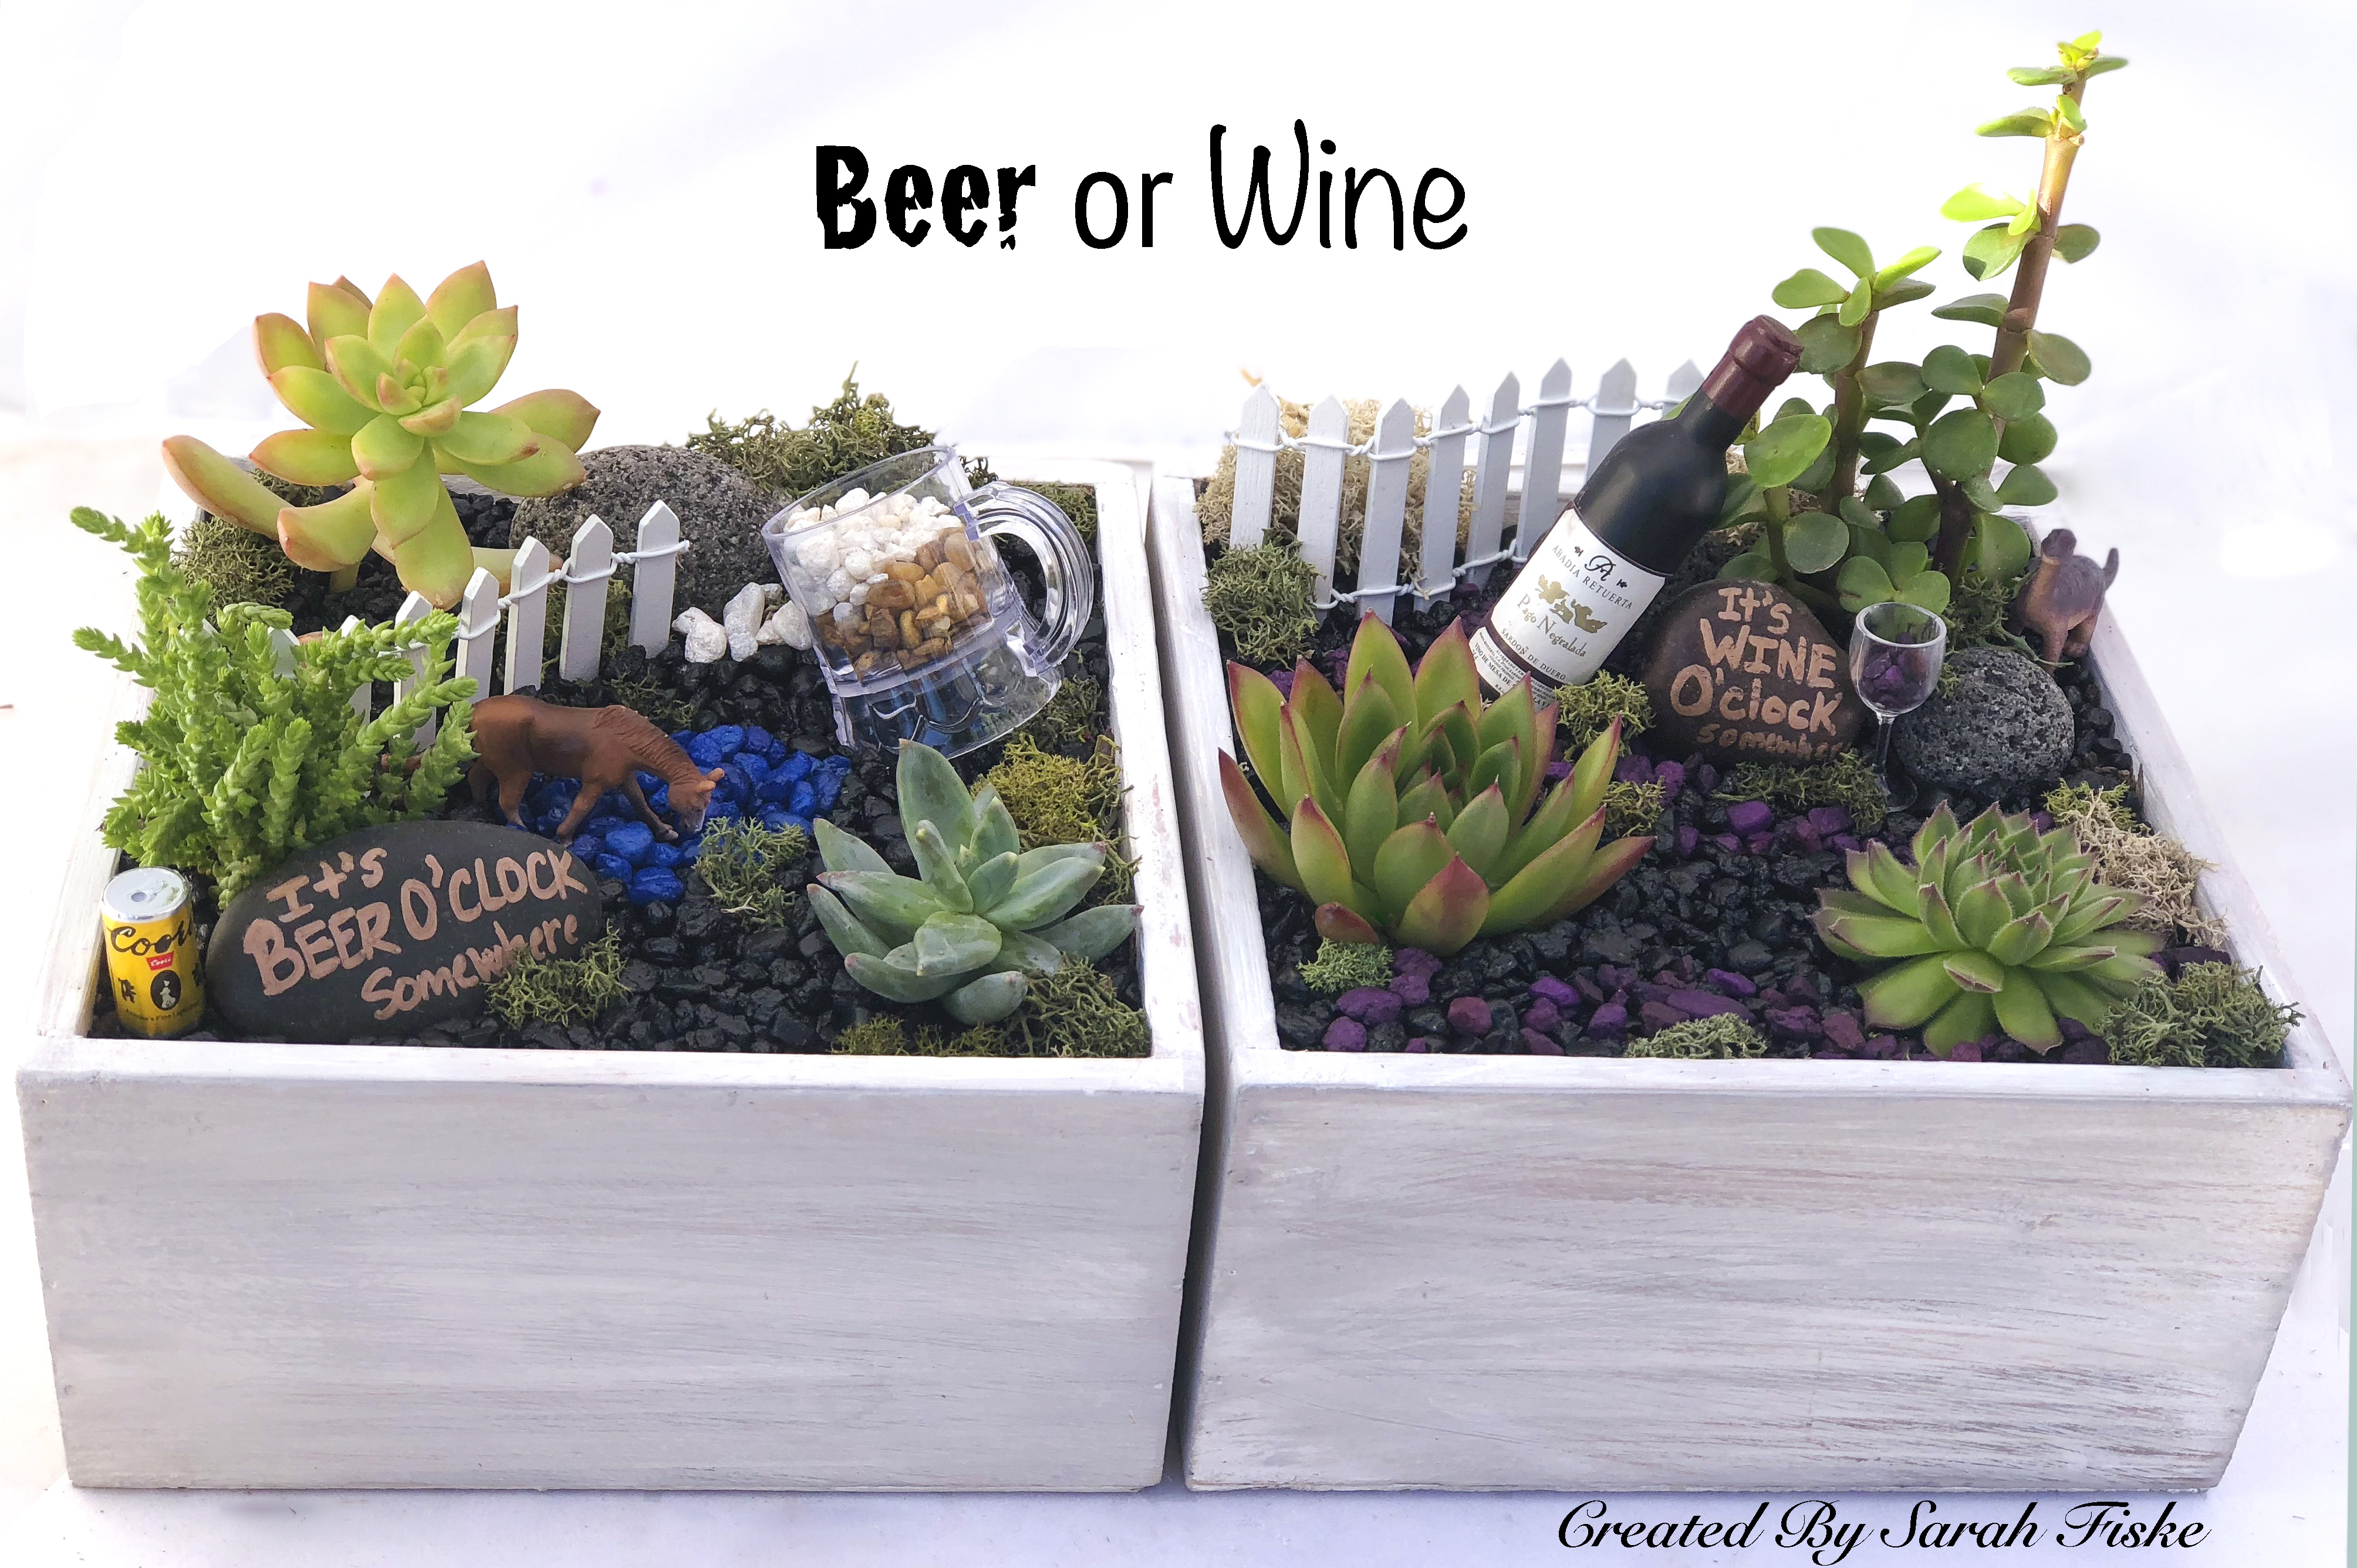 A Beer or Wine OClock Somewhere plant nite project by Yaymaker